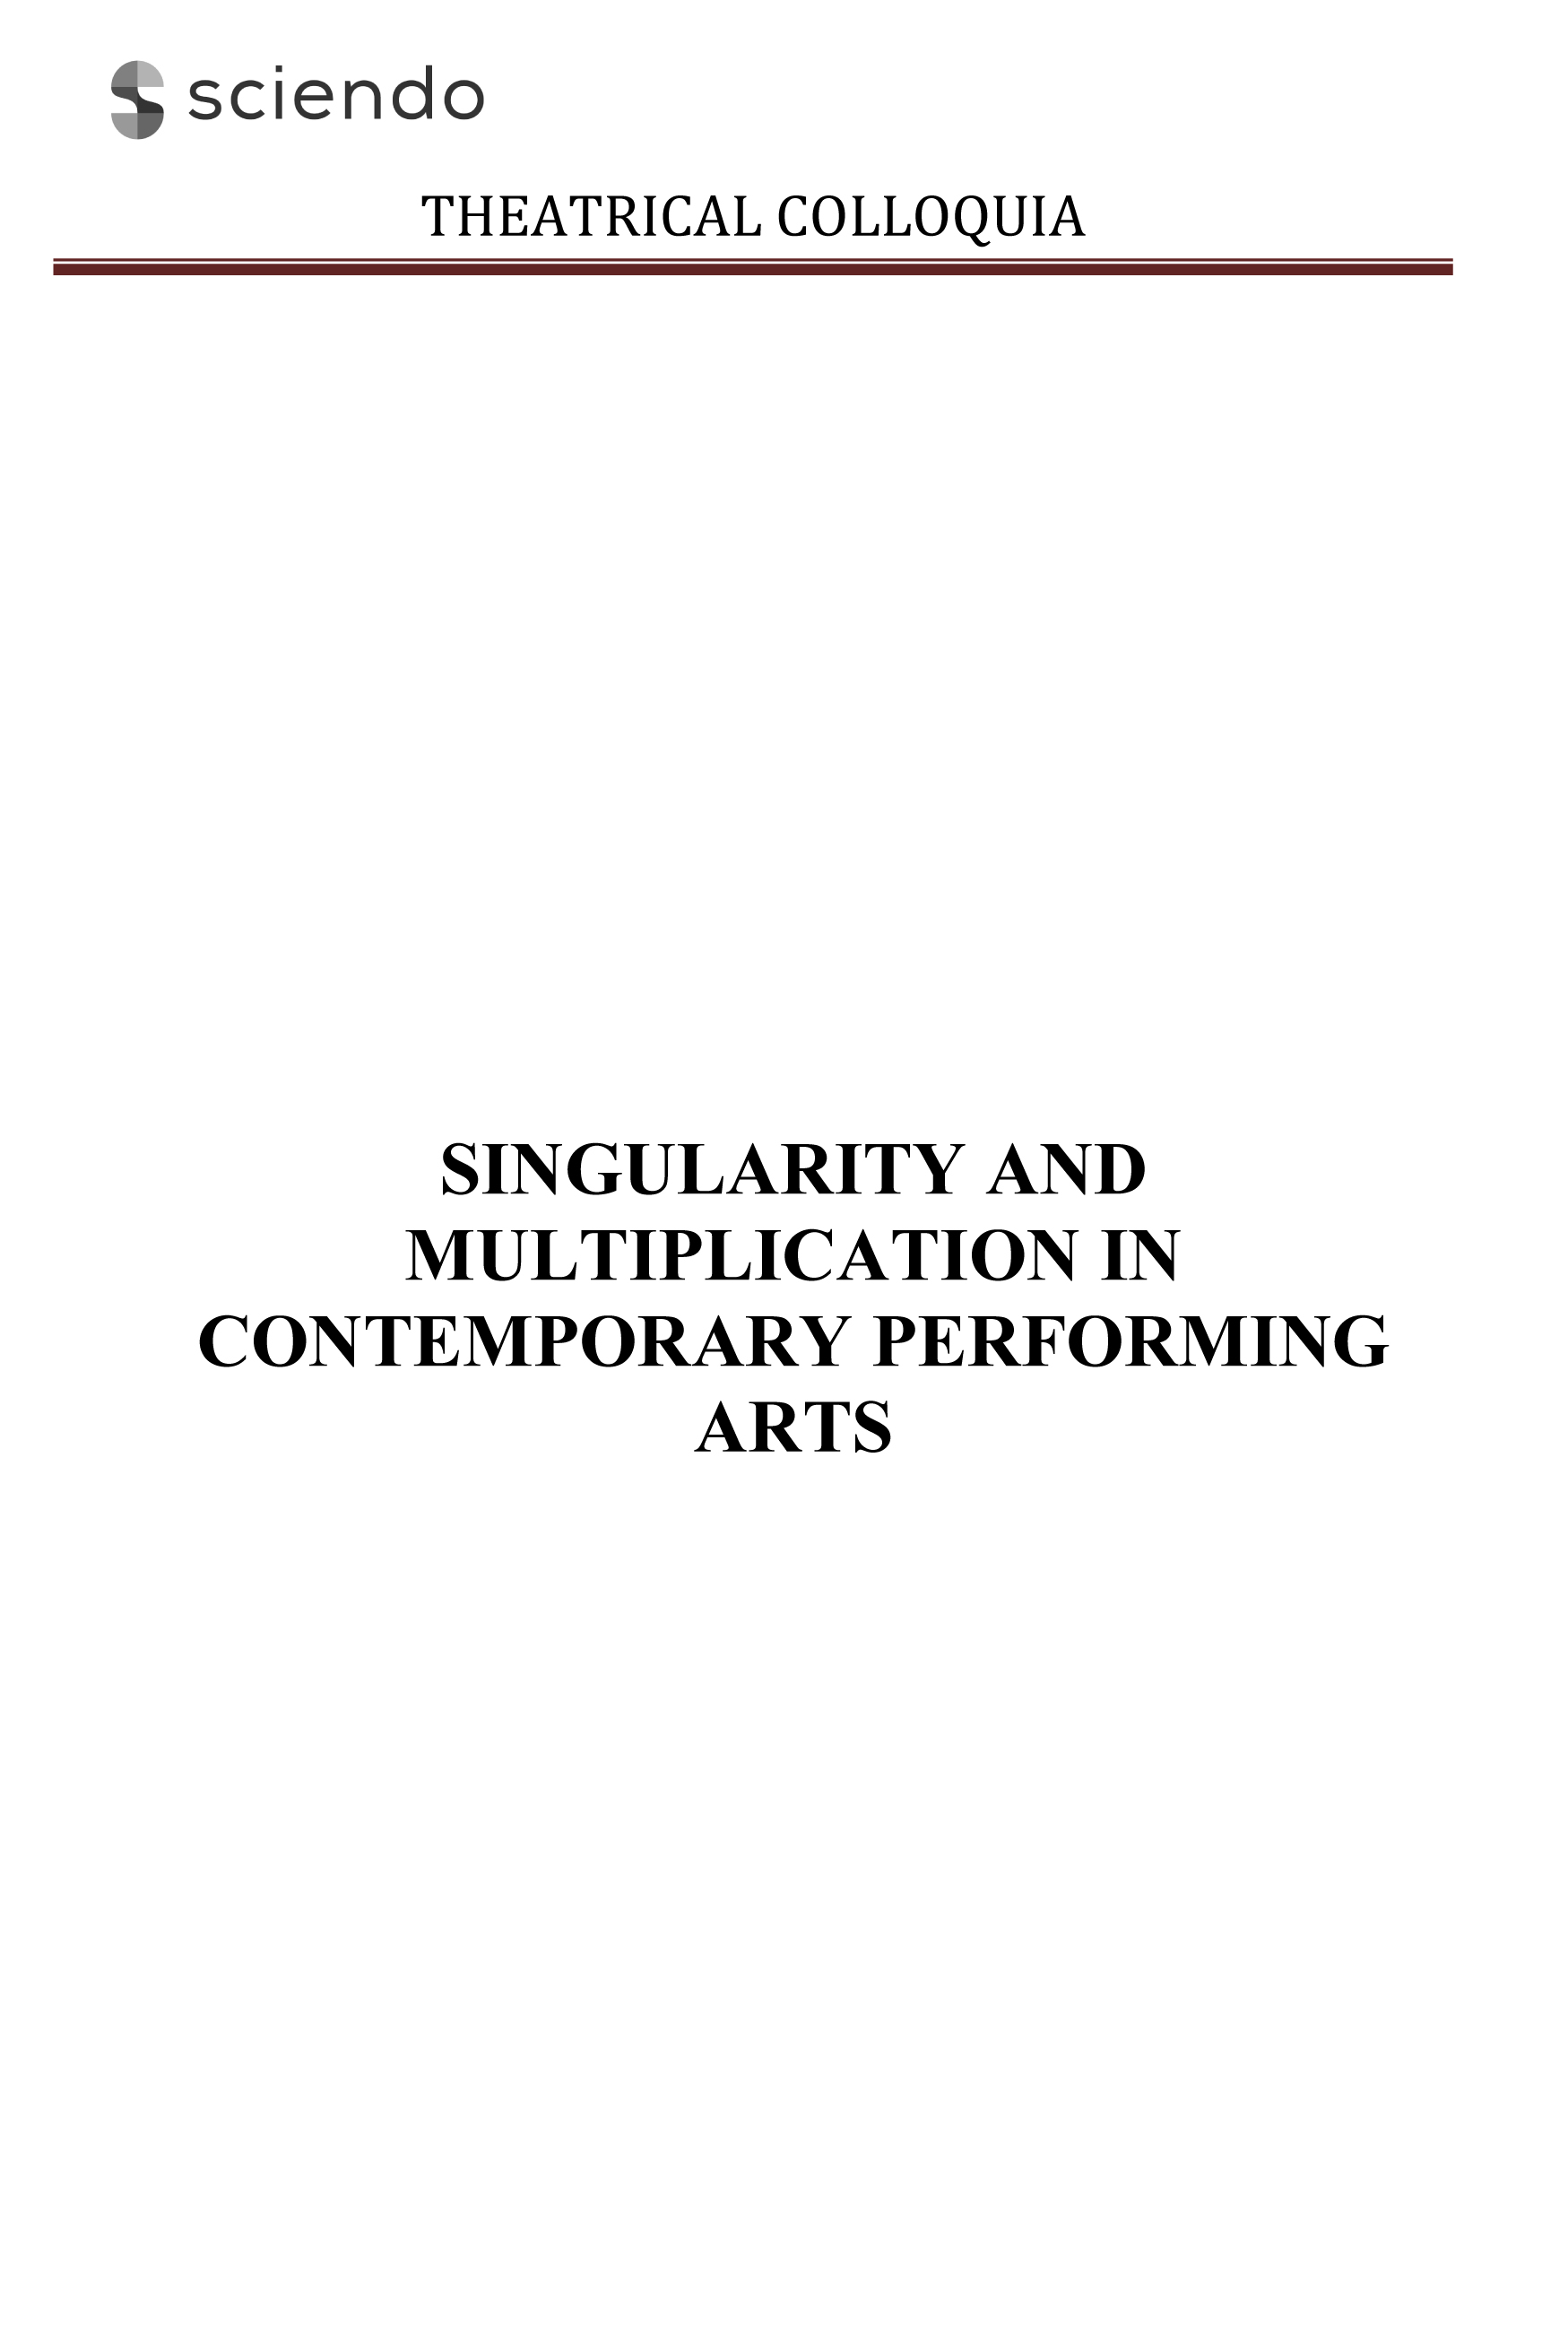 Particularity and Proliferation of Stroboscopic Elements in the Visual, Performing and Cinematographic Arts Cover Image